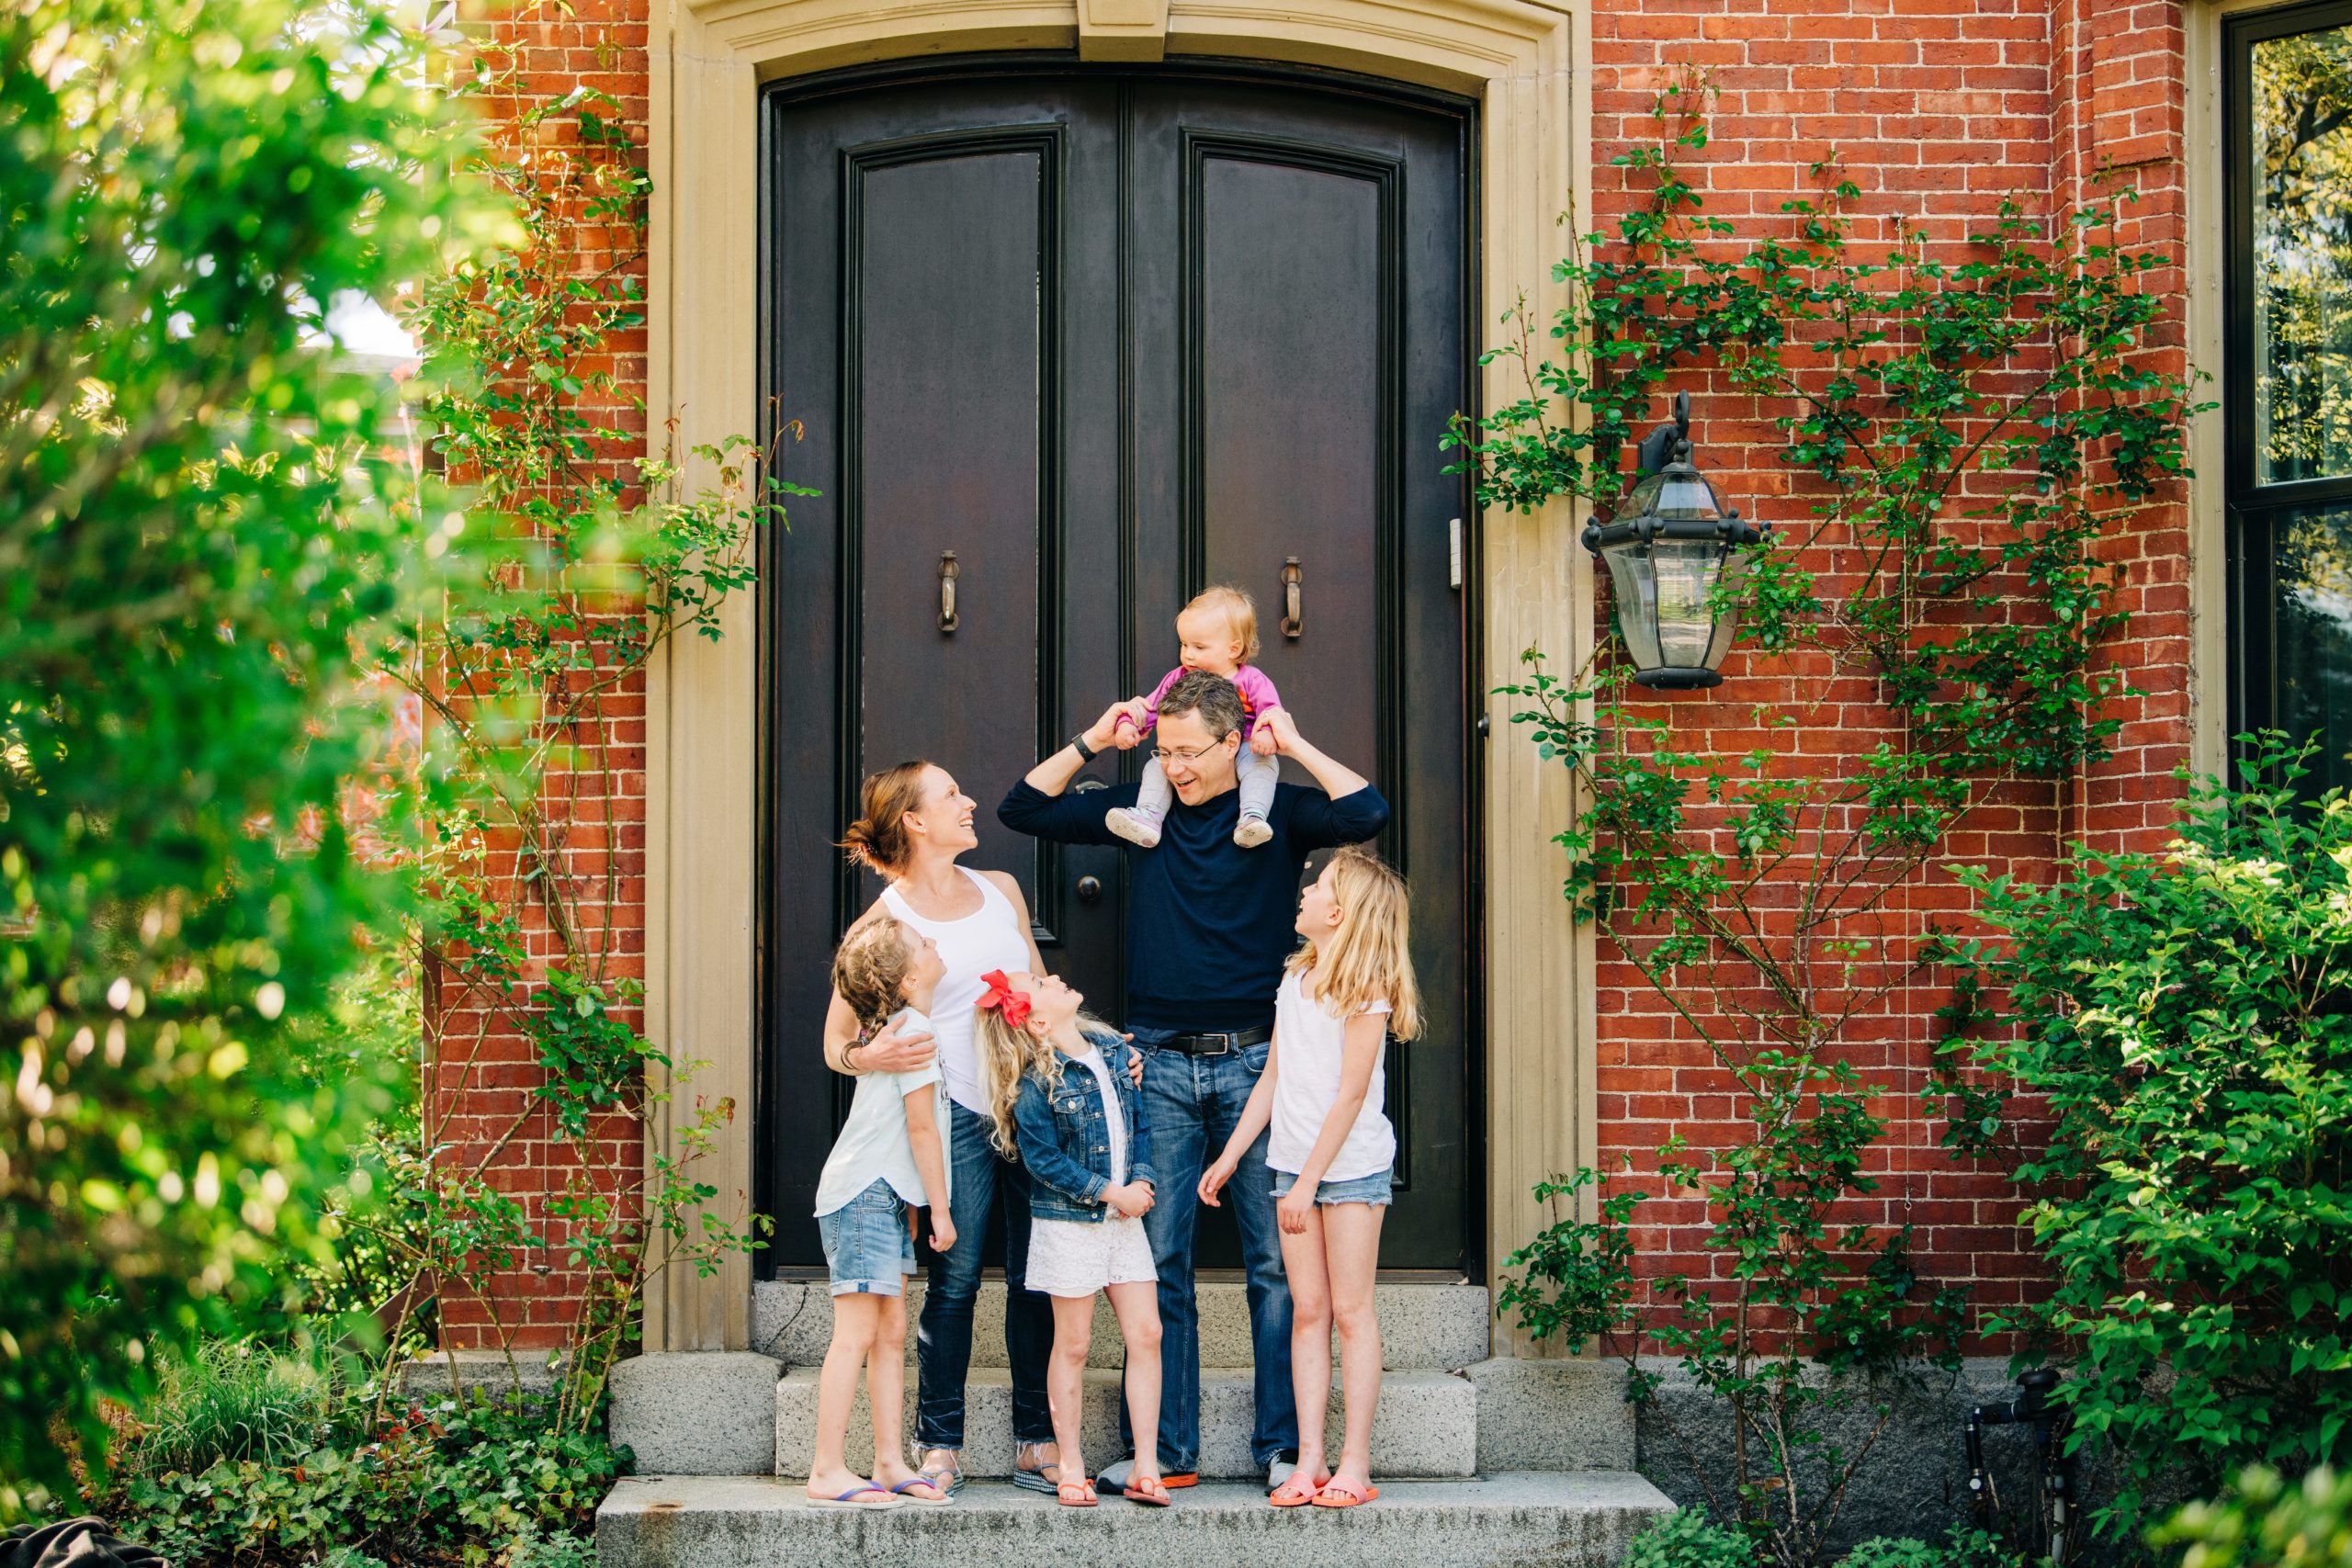 Helena Goessens Photography captures Boston families during Front Steps Project